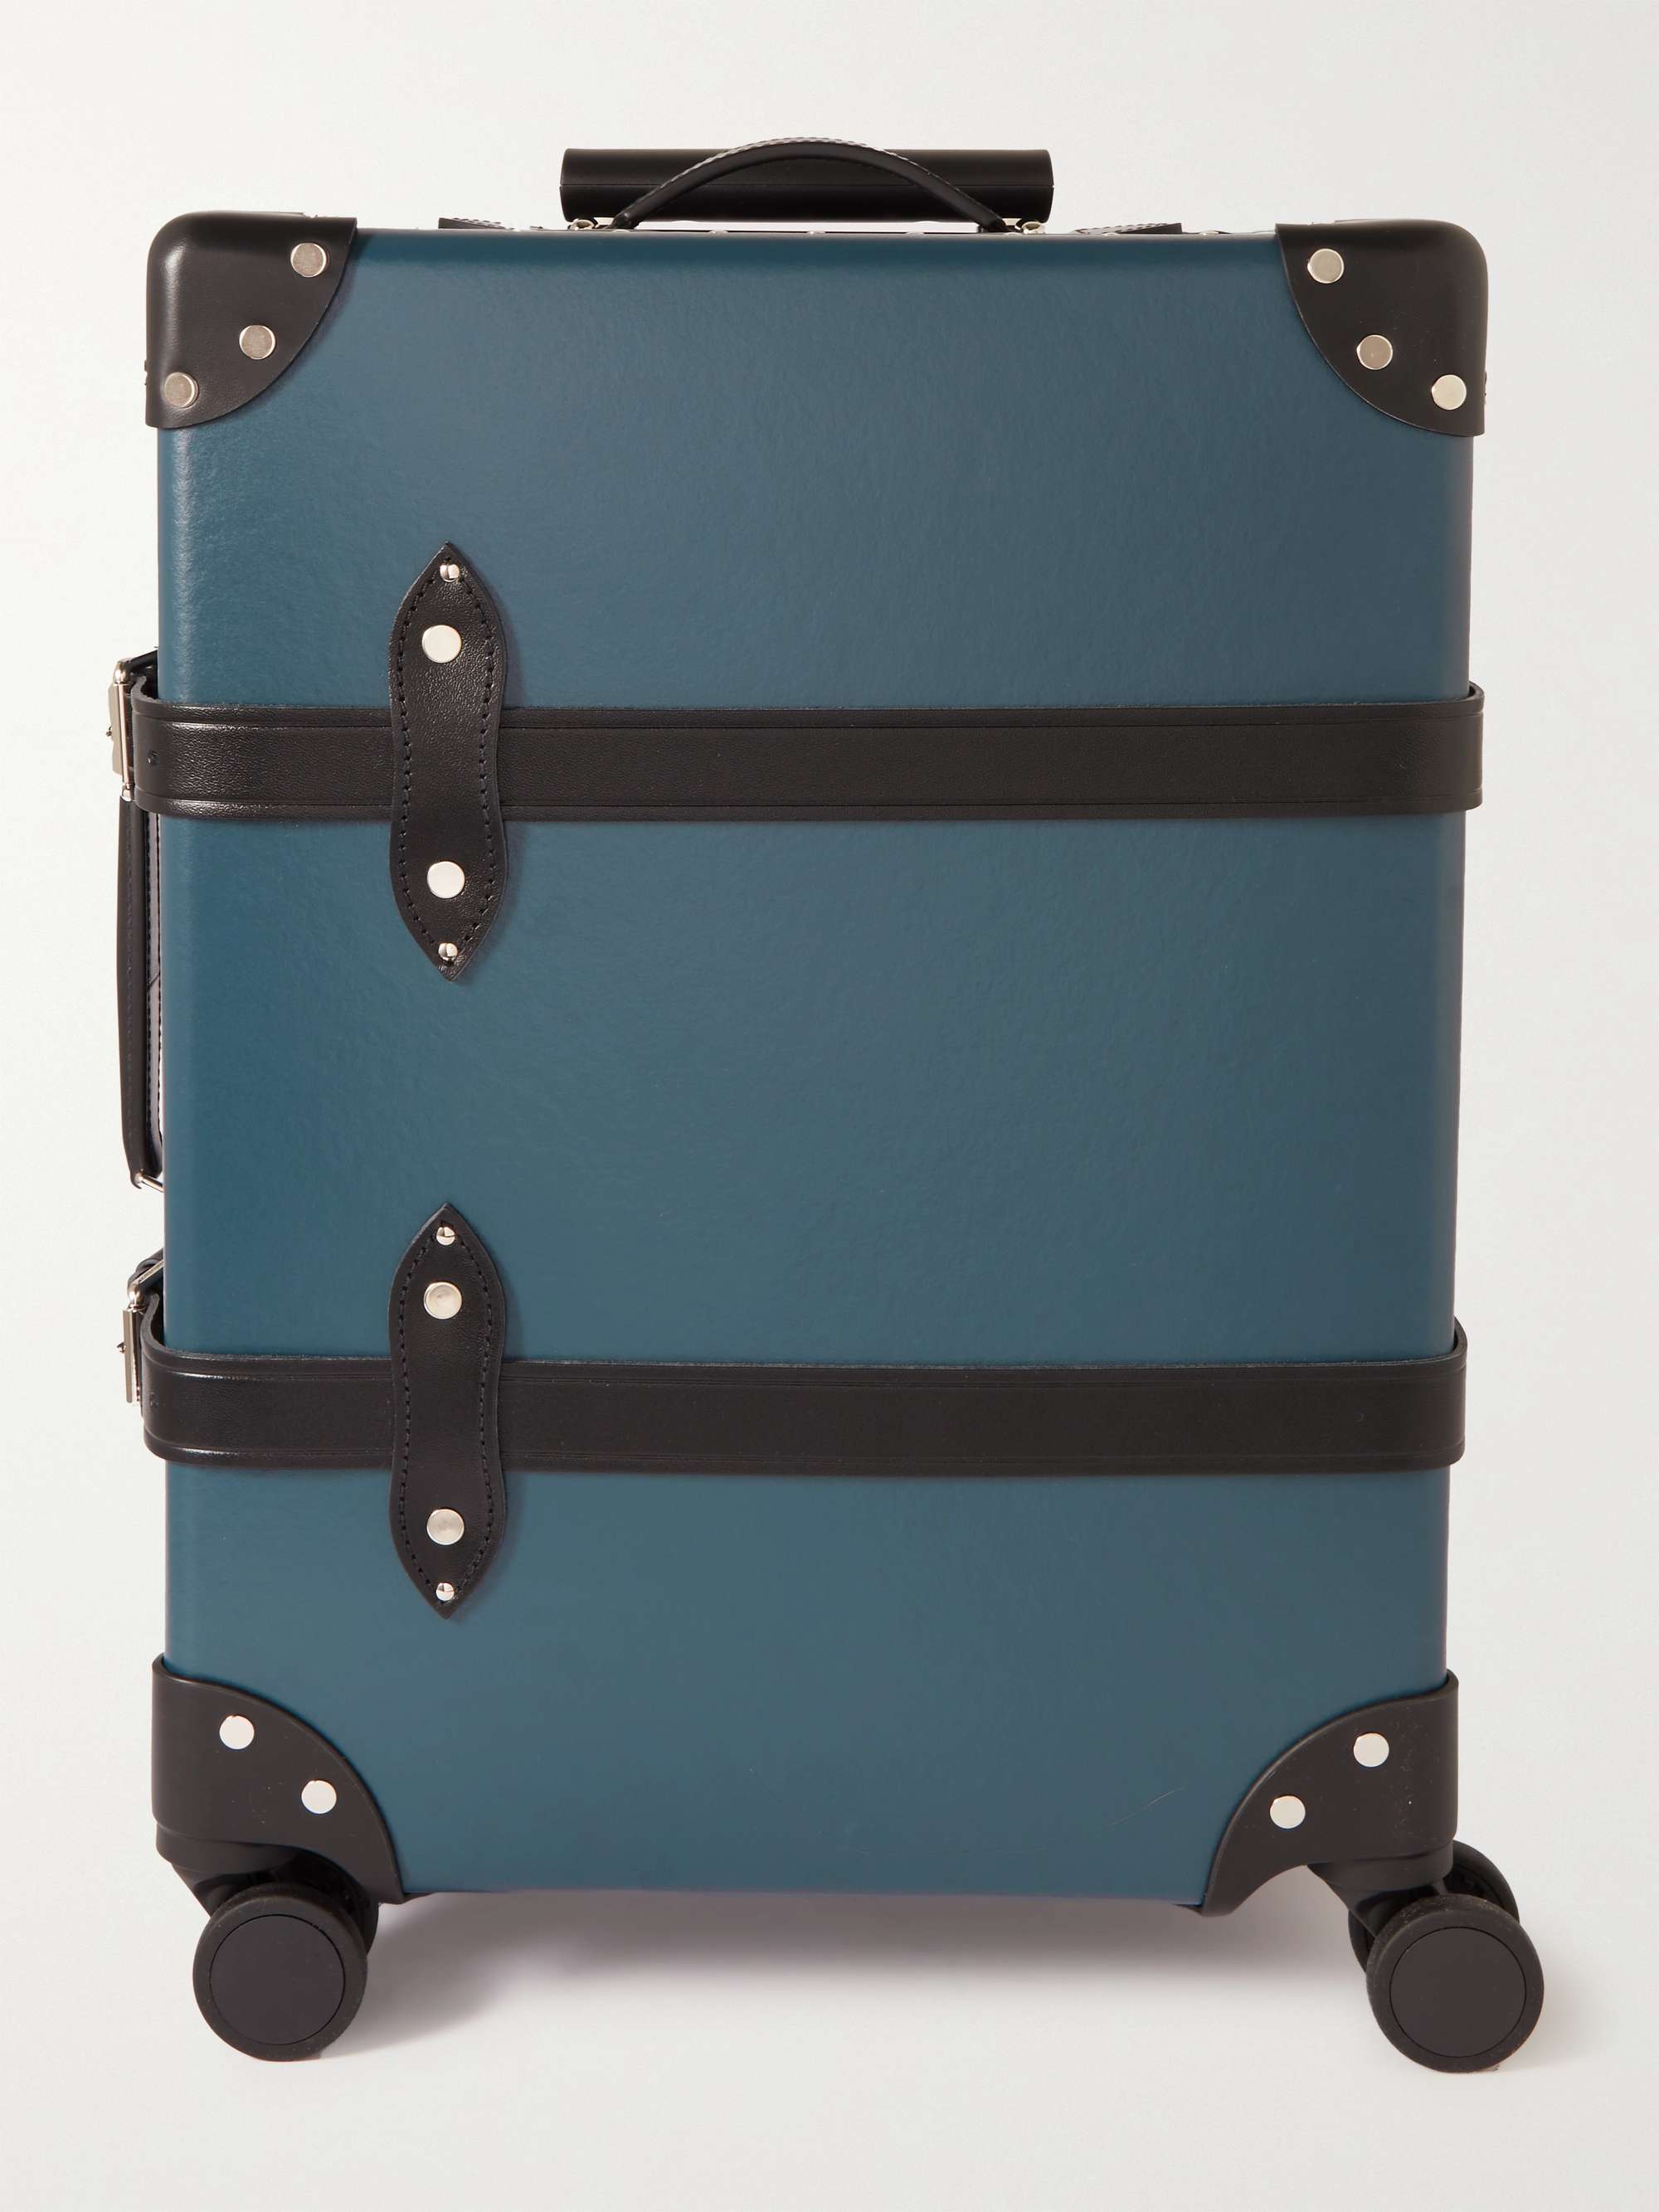 GLOBE-TROTTER + Dr. No Carry-On Leather-Trimmed Trolley Suitcase for Men |  MR PORTER